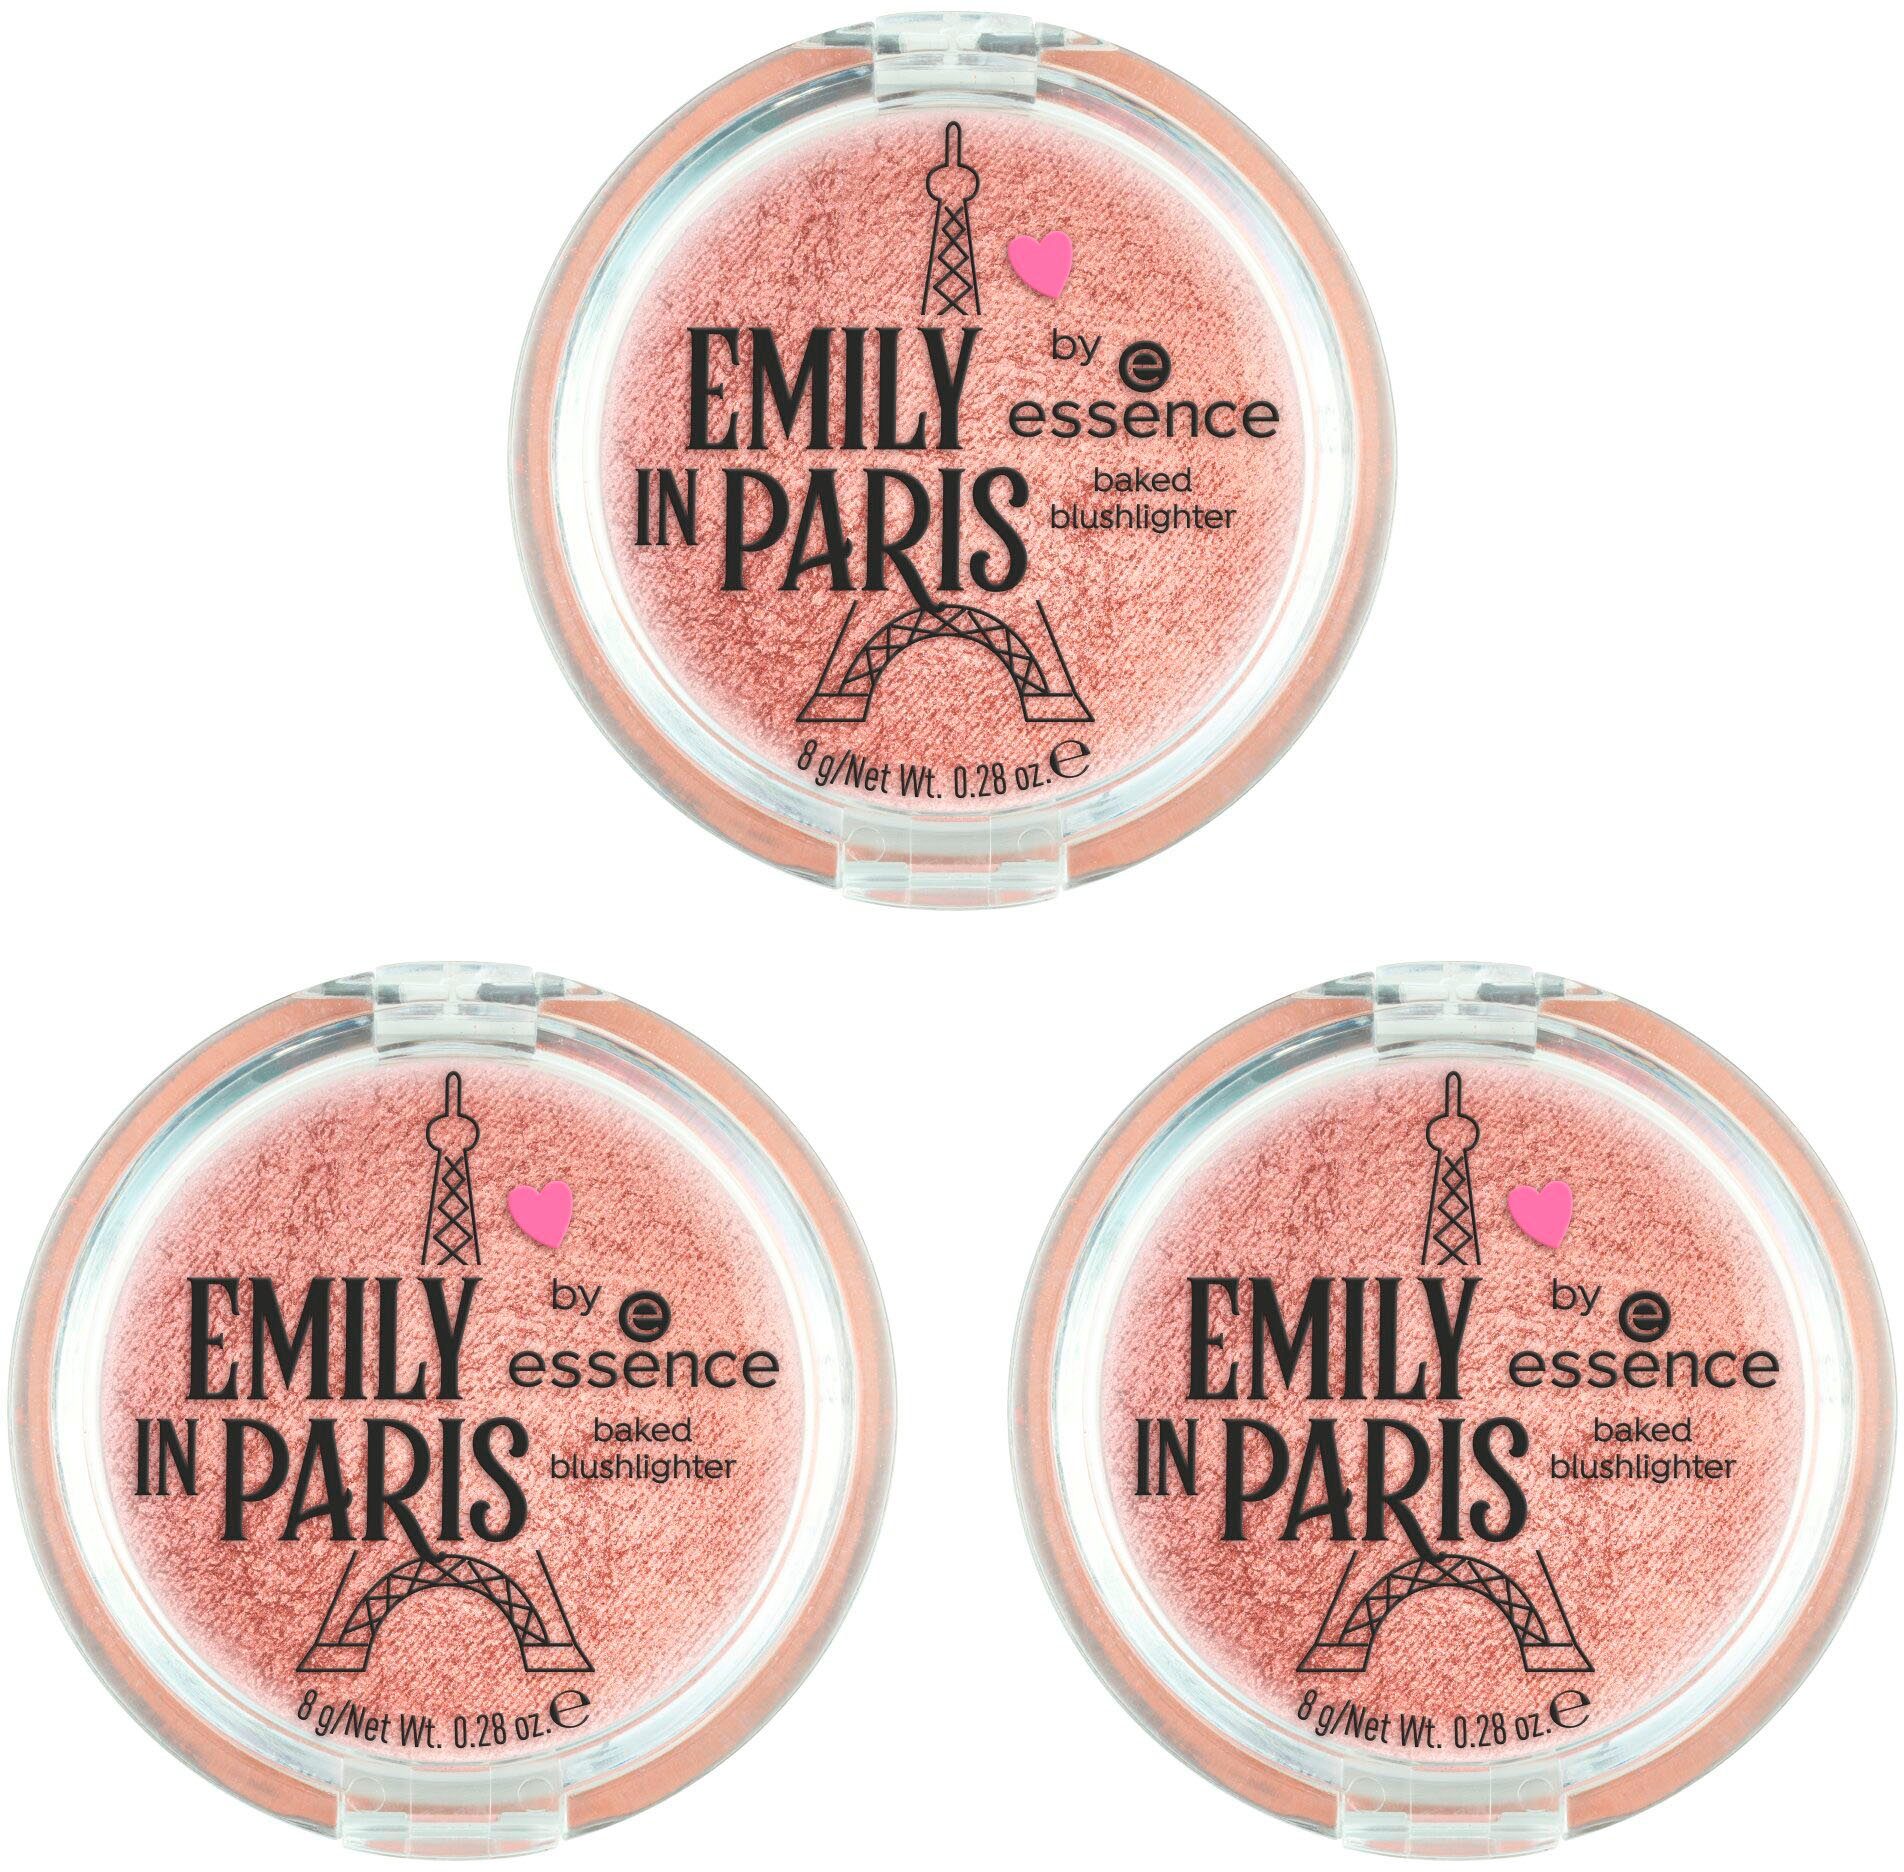 PARIS Essence Rouge EMILY blushlighter essence by baked IN